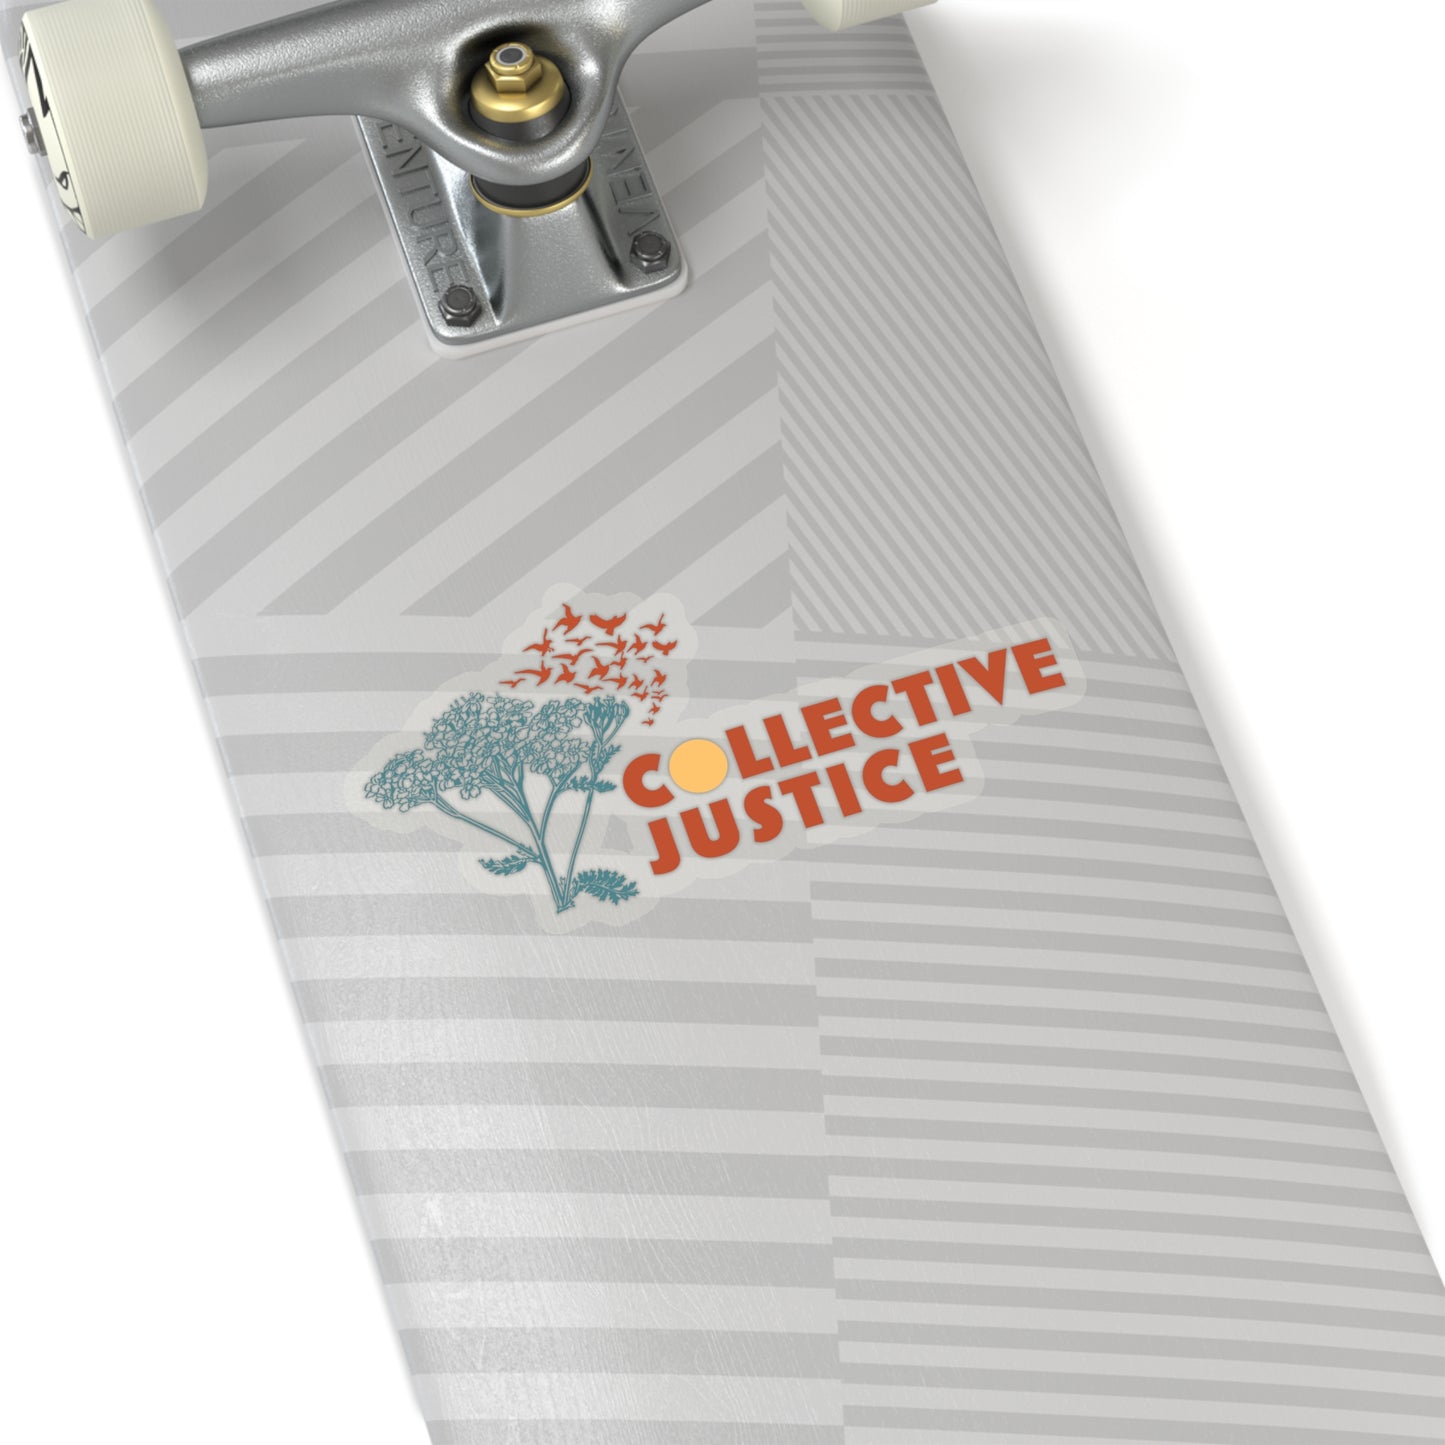 Collective Justice Sticker